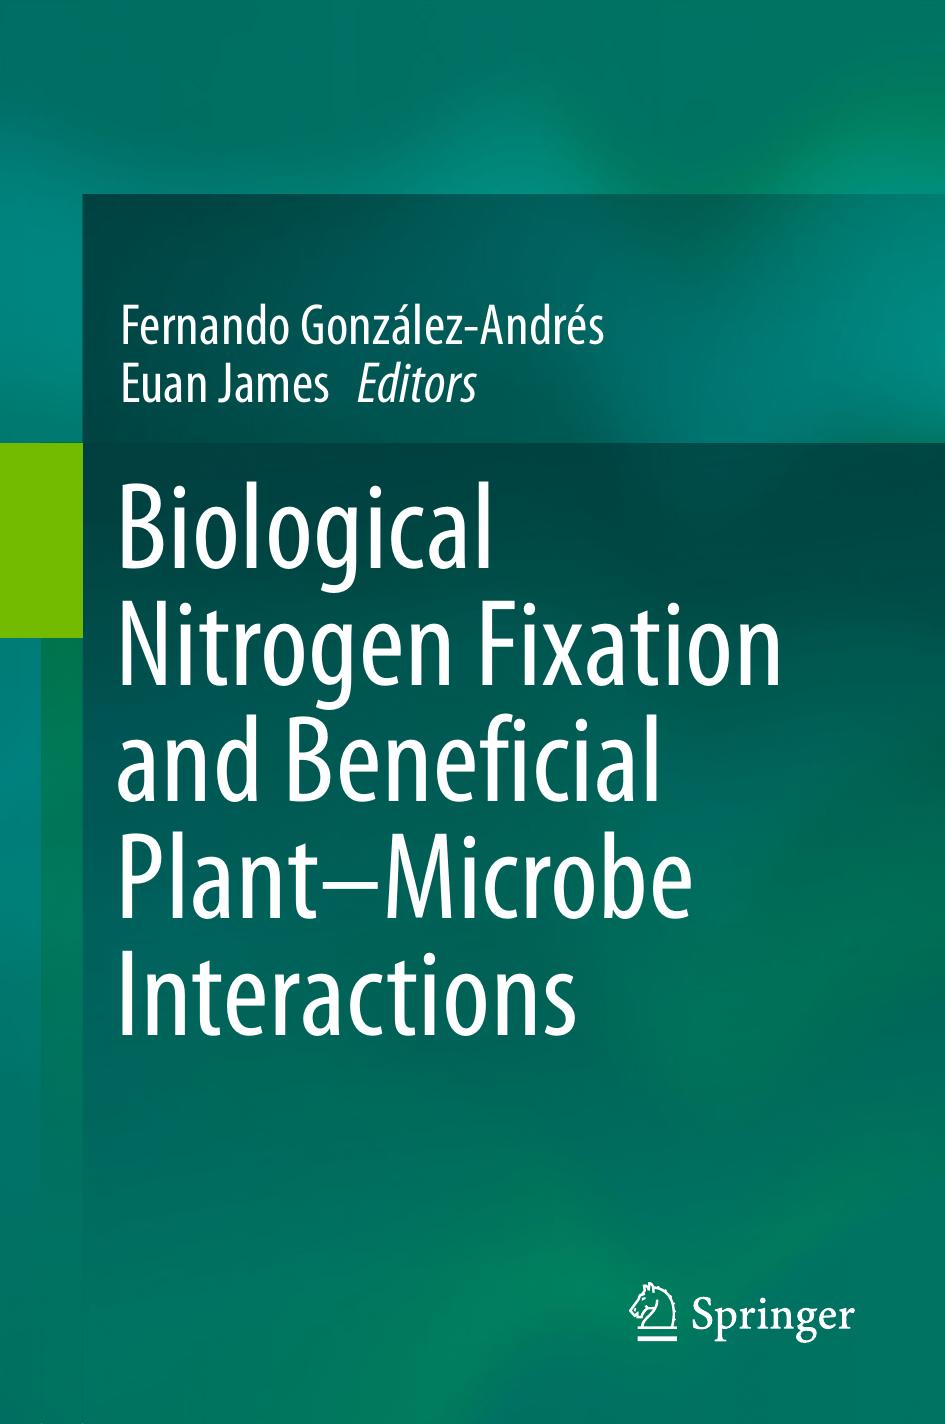 Biological Nitrogen Fixation and Beneficial Plant-Microbe Interaction 2016